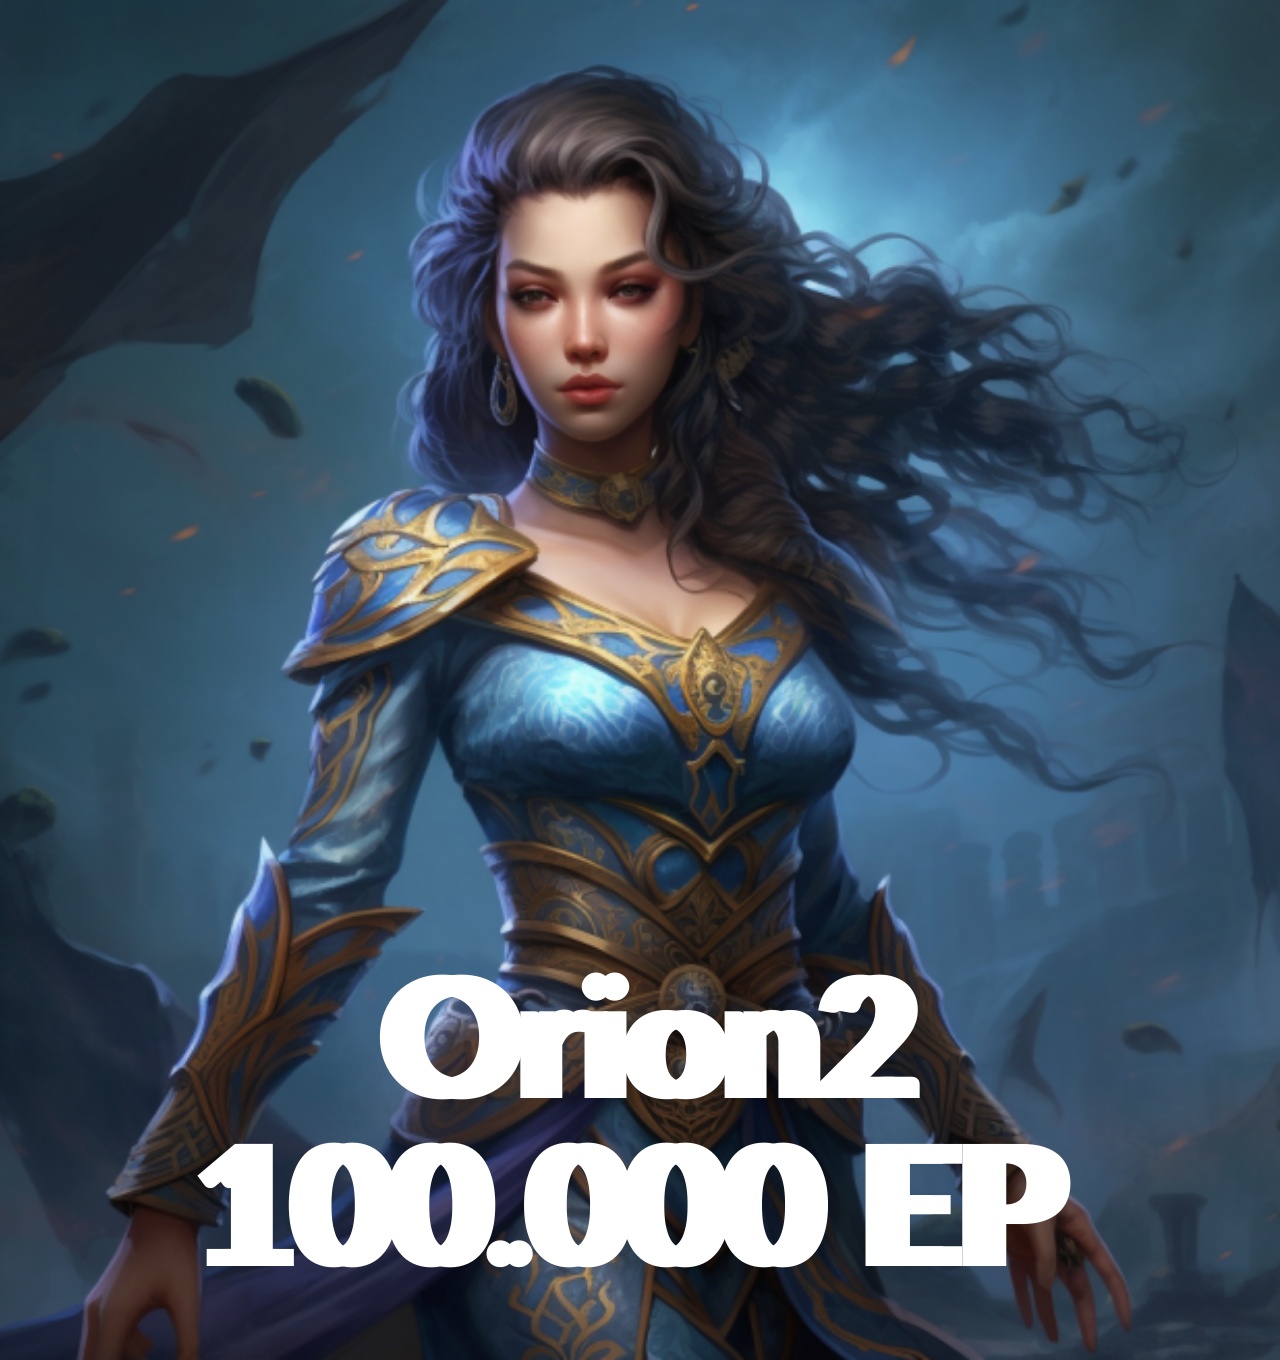 Orion2 100.000 EP